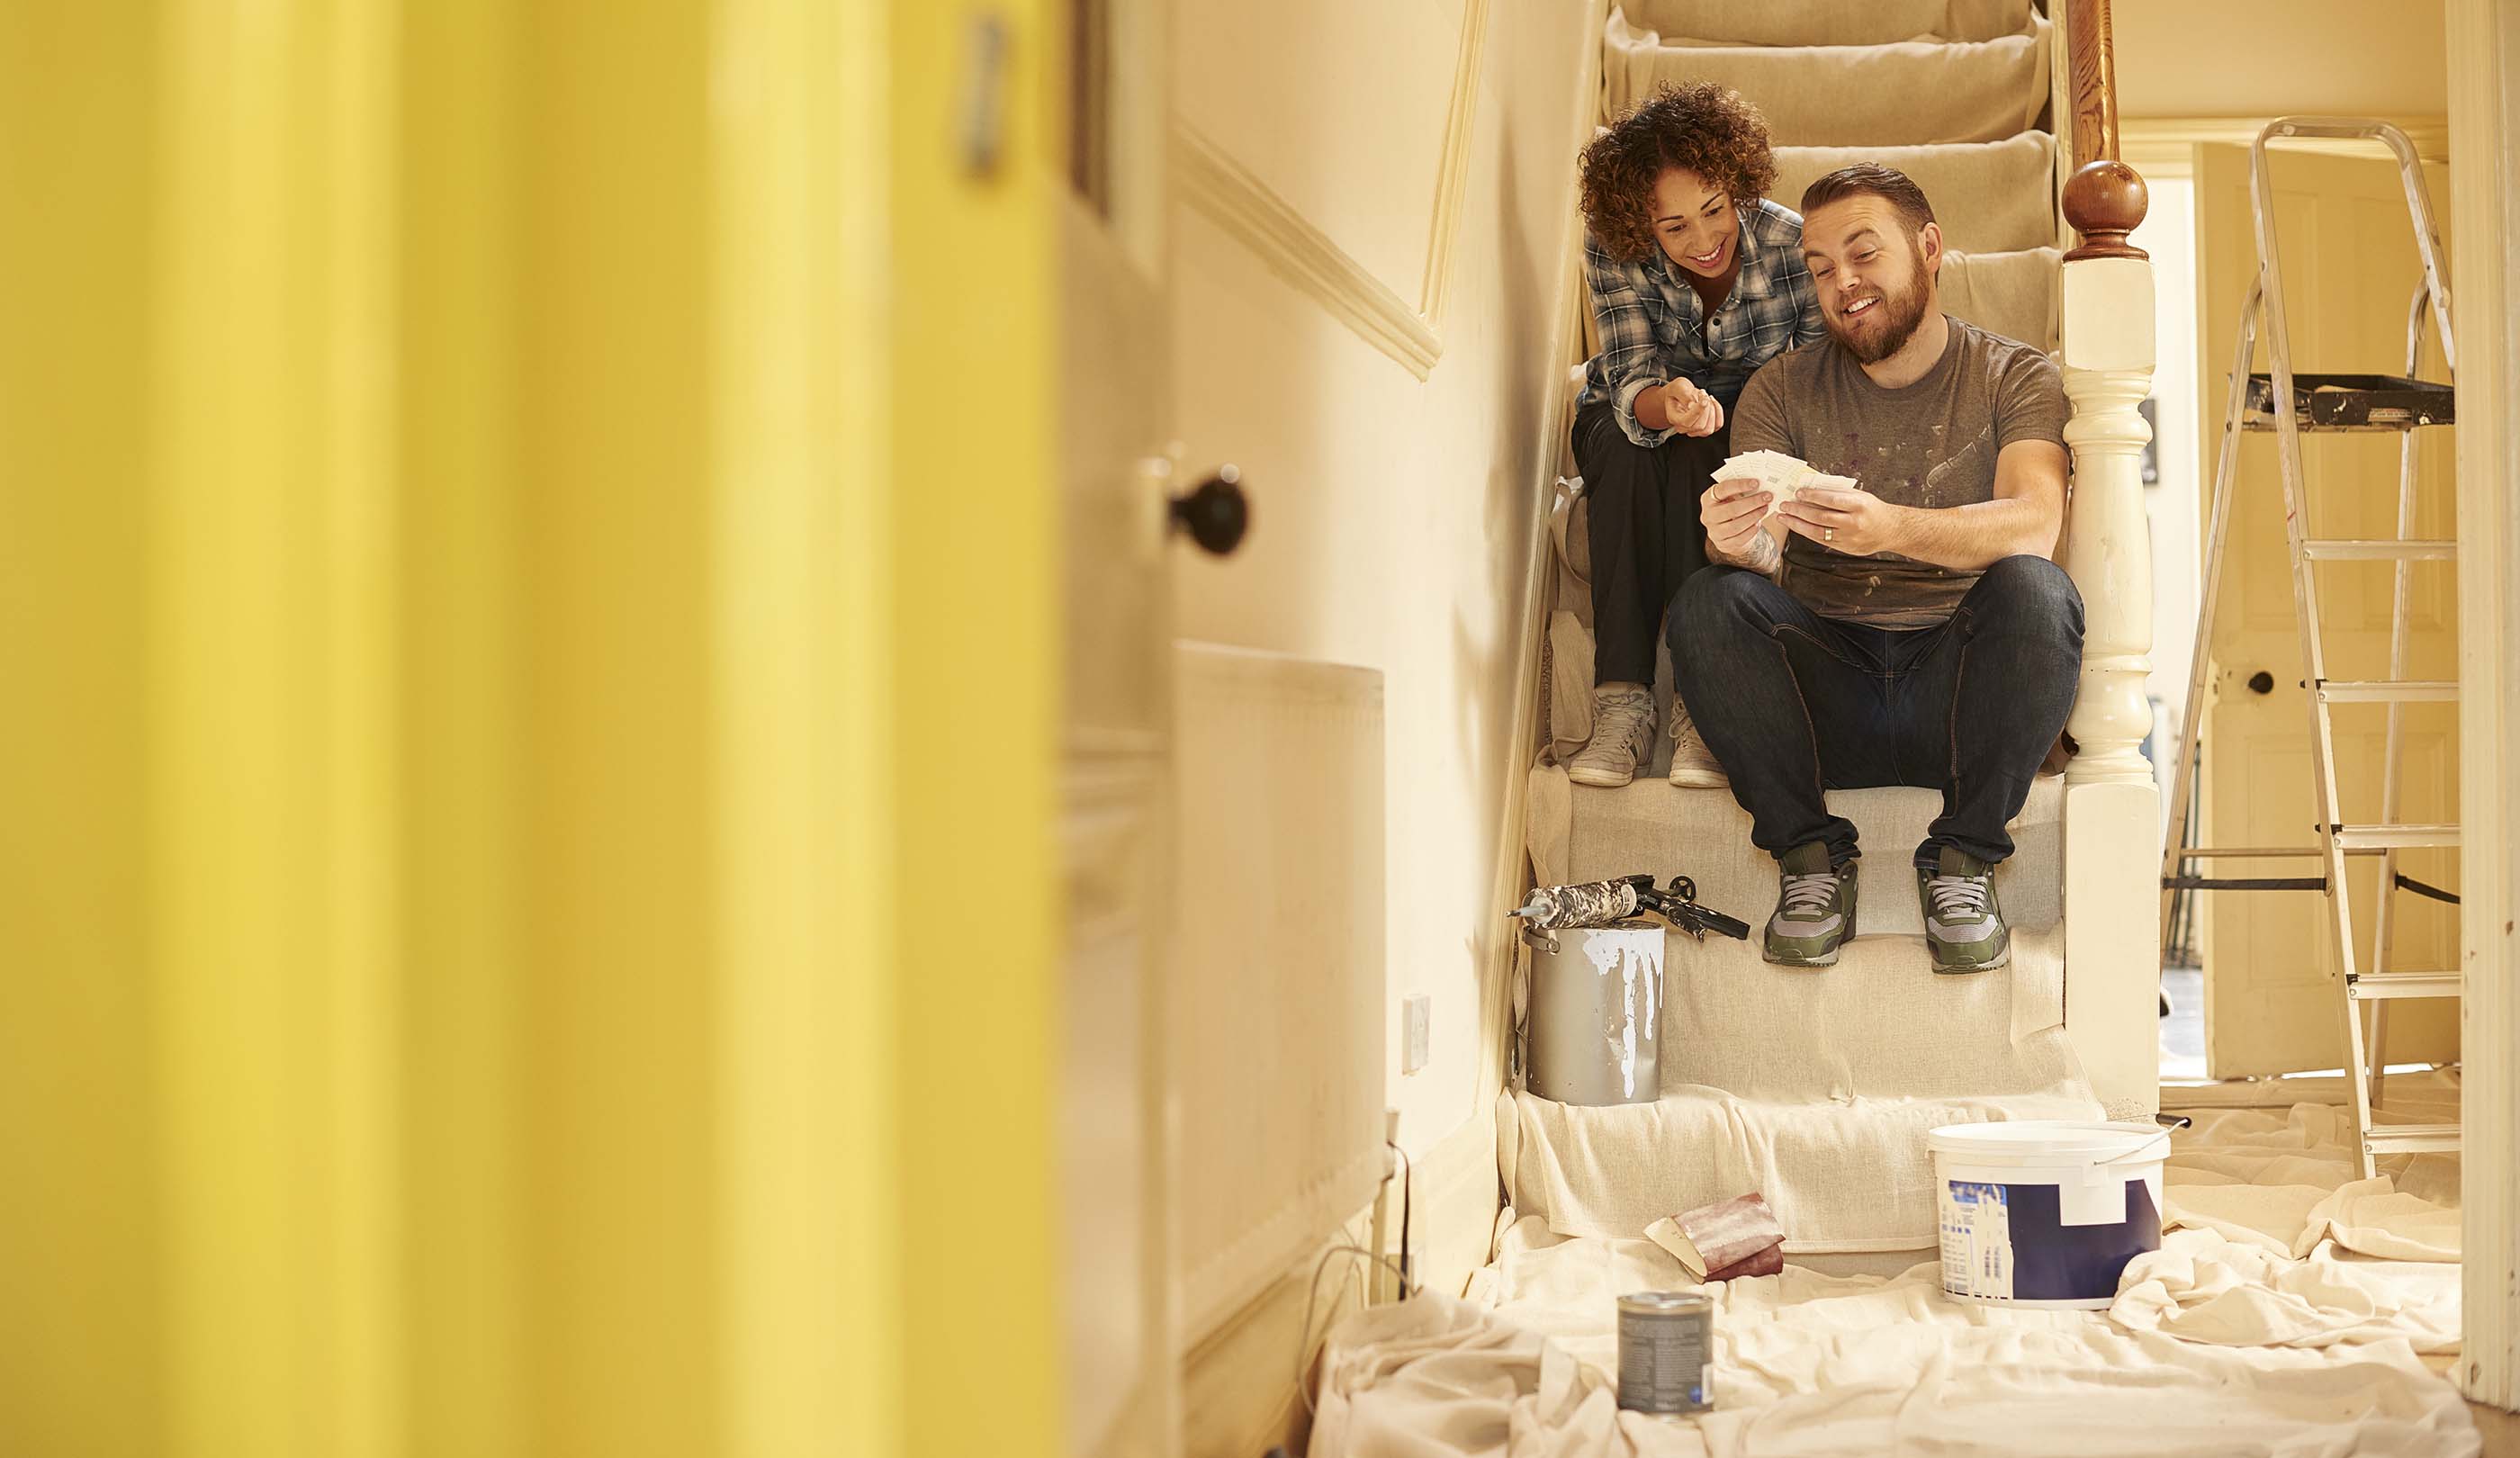 Two people sat on a staircase looking at paint swatches. There is a sheet on the ground and cans of paint. They are in the middle of decorating.